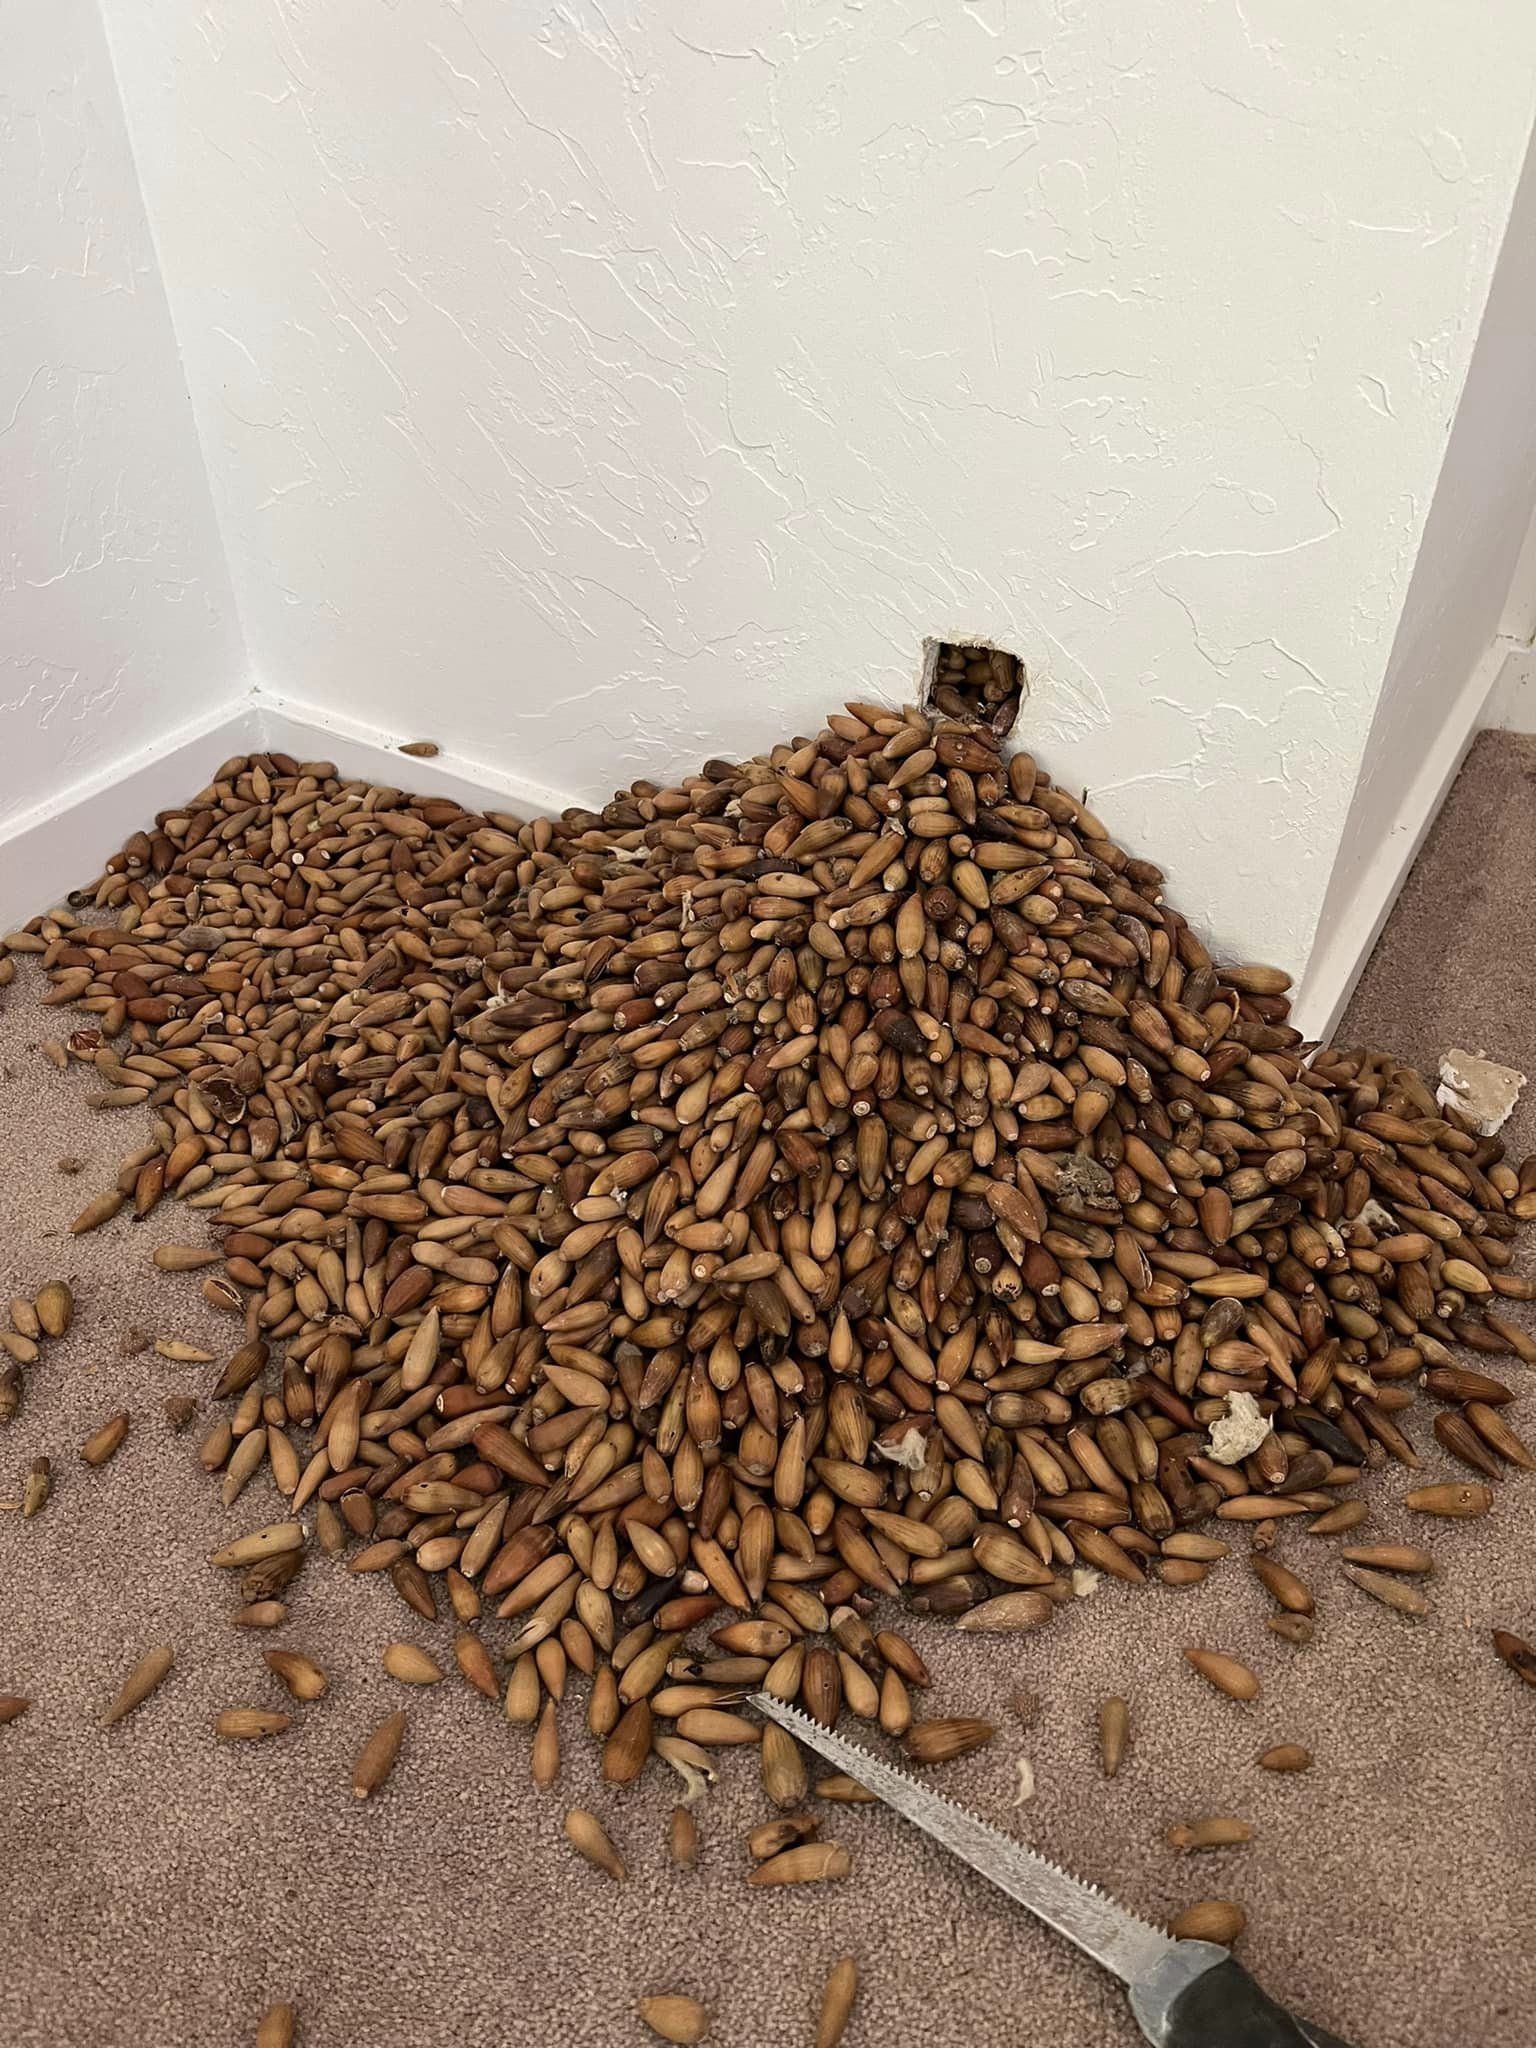 326321902 849887139424721 867083771360284956 n Woodpeckers Stashed 700 Pounds Of Nuts Inside The Walls Of This California Home